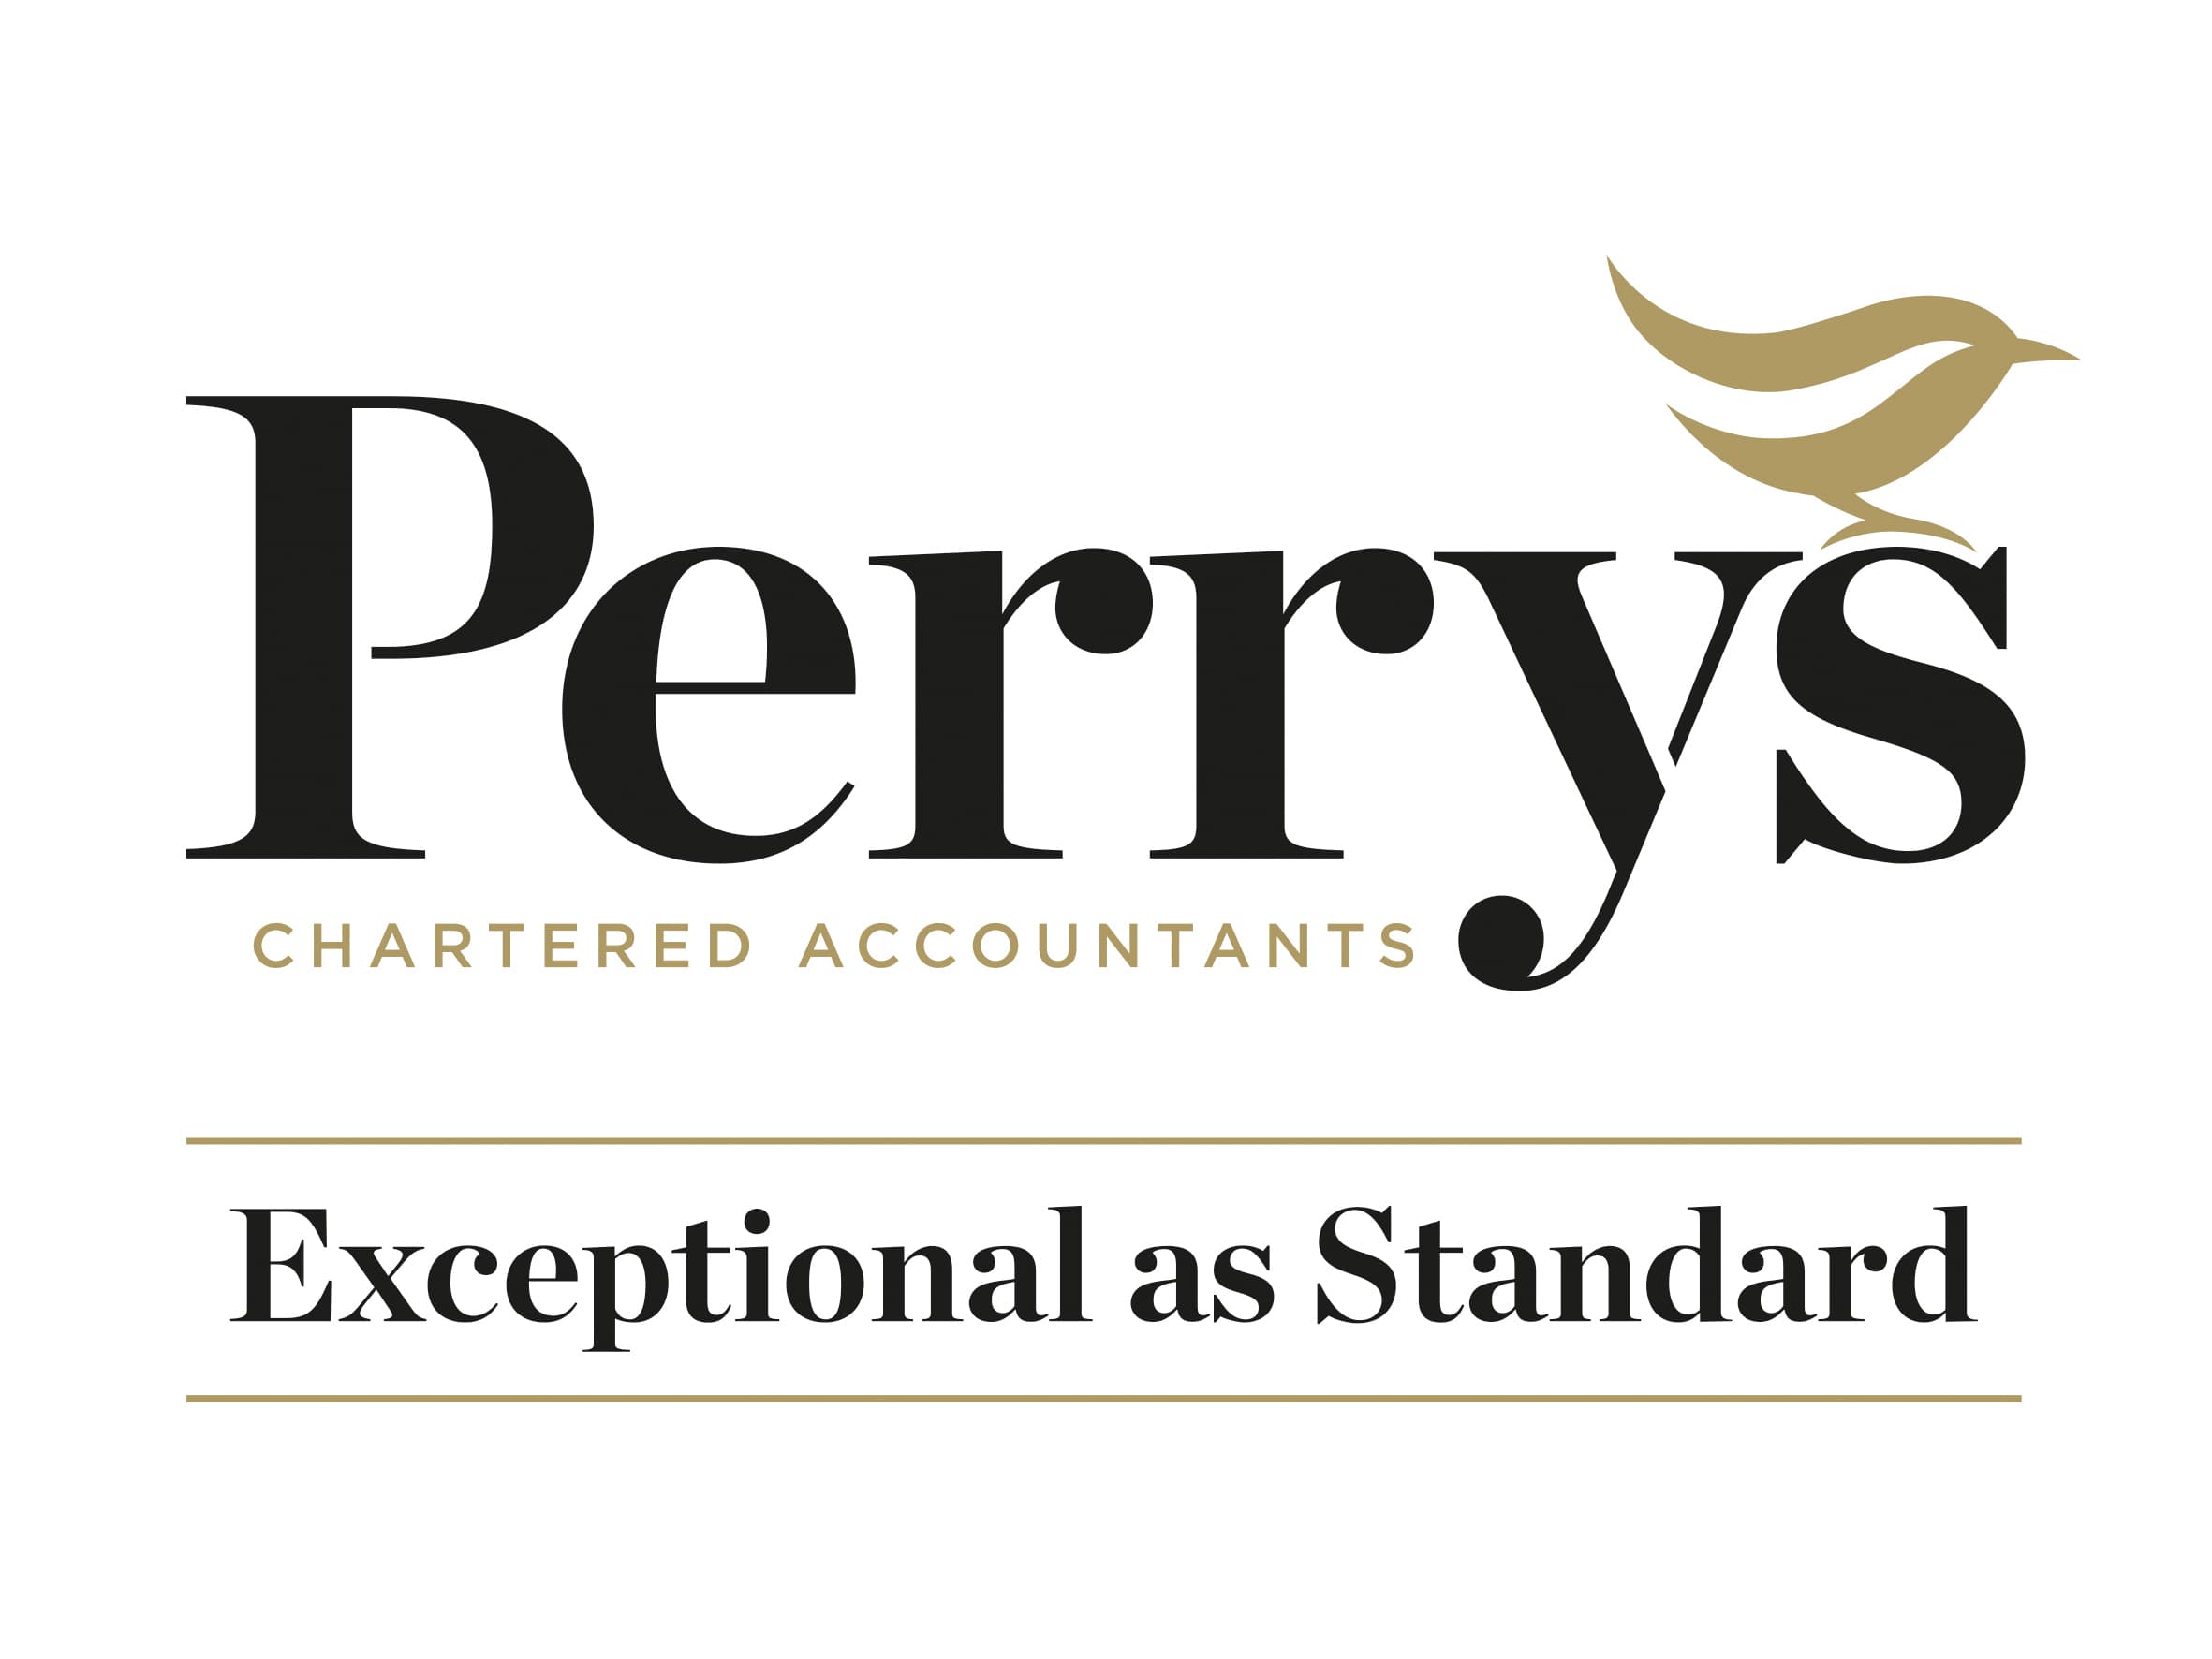 Perrys Chartered Accountants